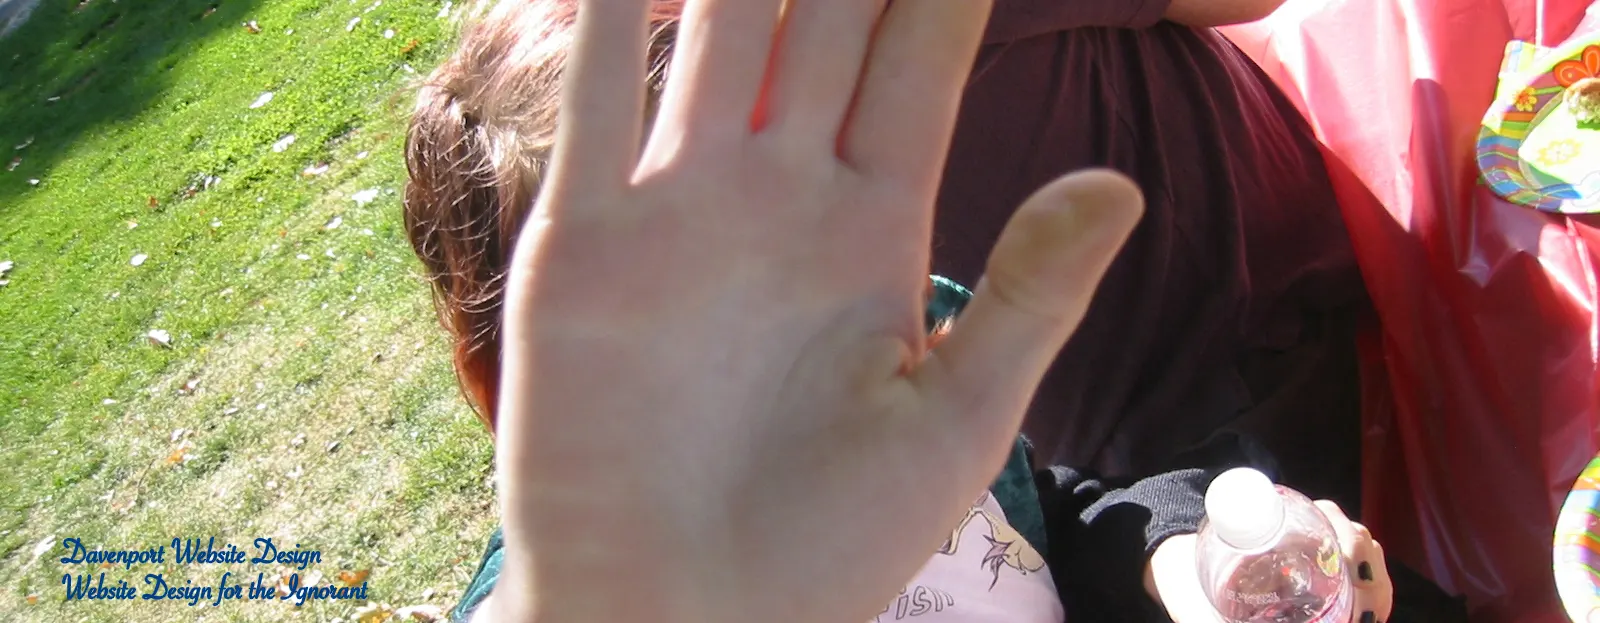 A hand in front of the camera at a picnic.